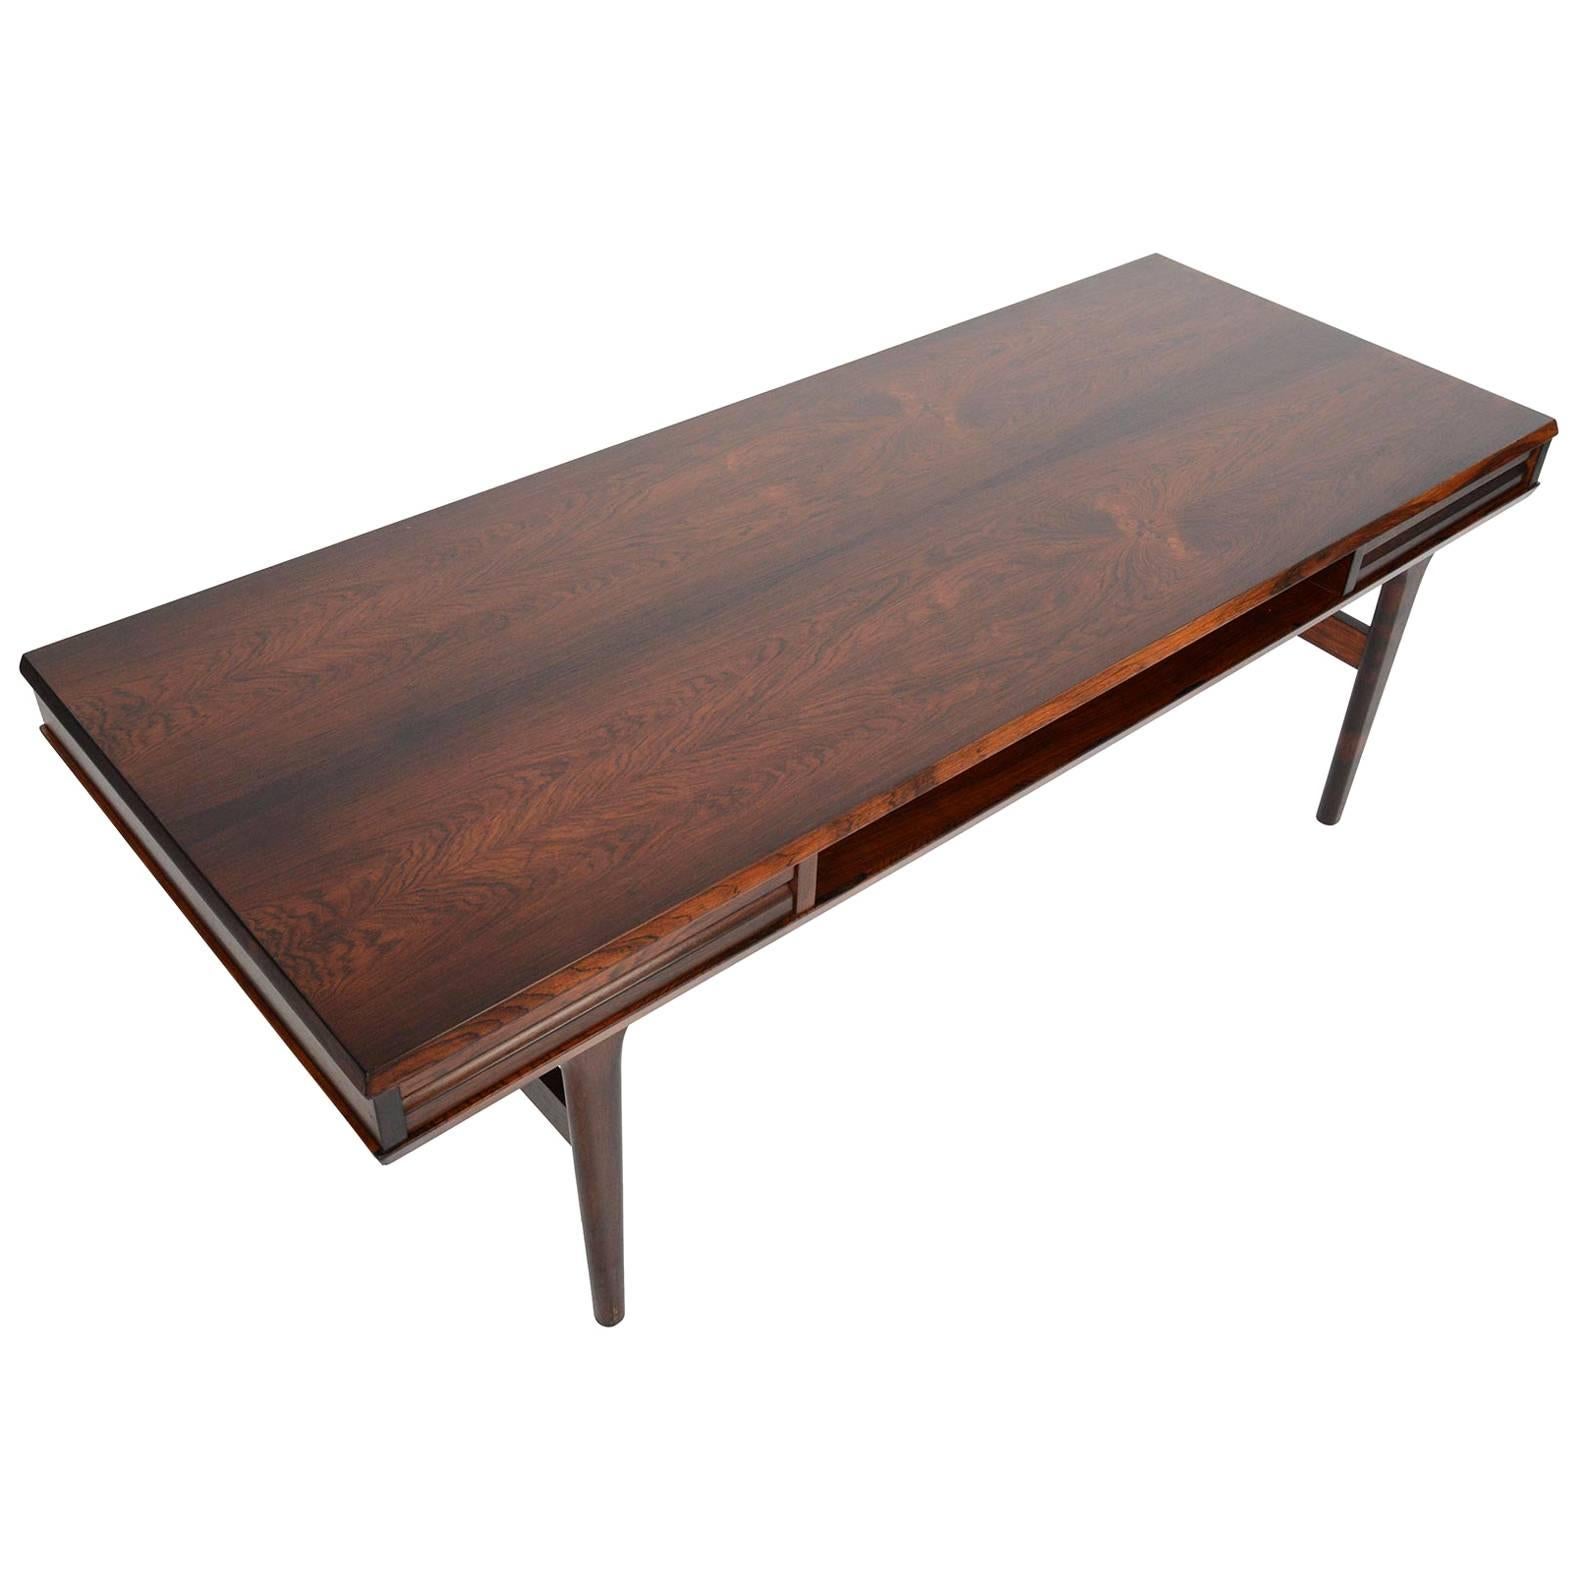 Danish Modern Rosewood Coffee Table with Drawers